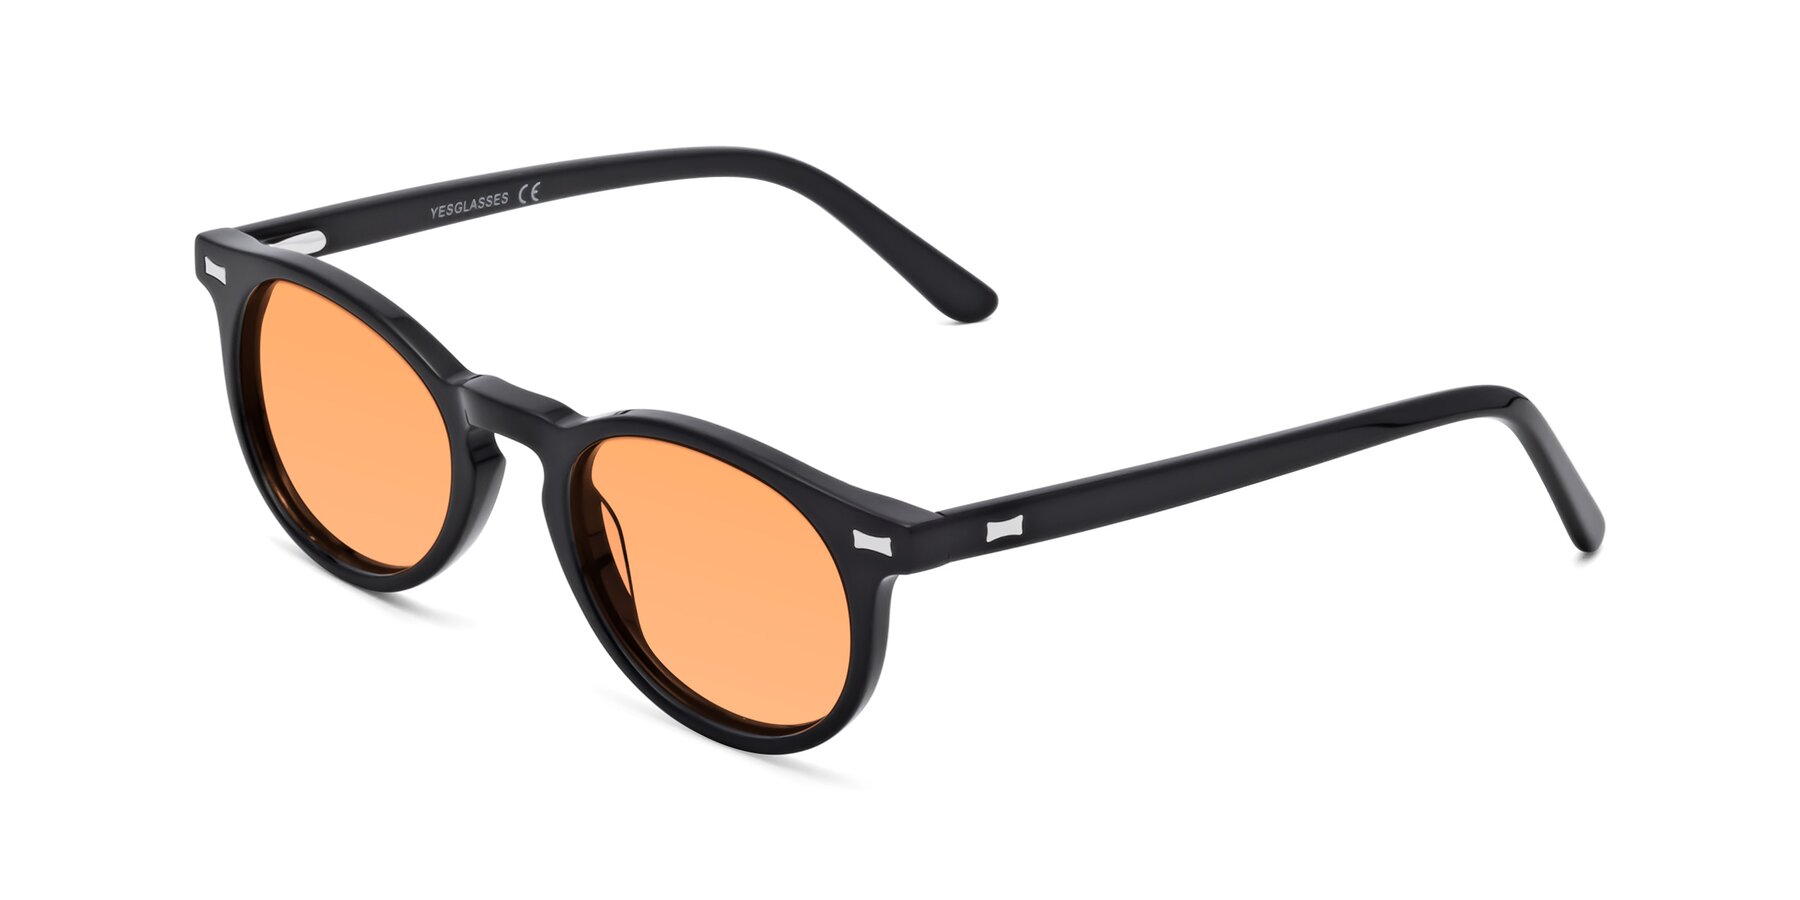 Angle of 17330 in Black with Medium Orange Tinted Lenses